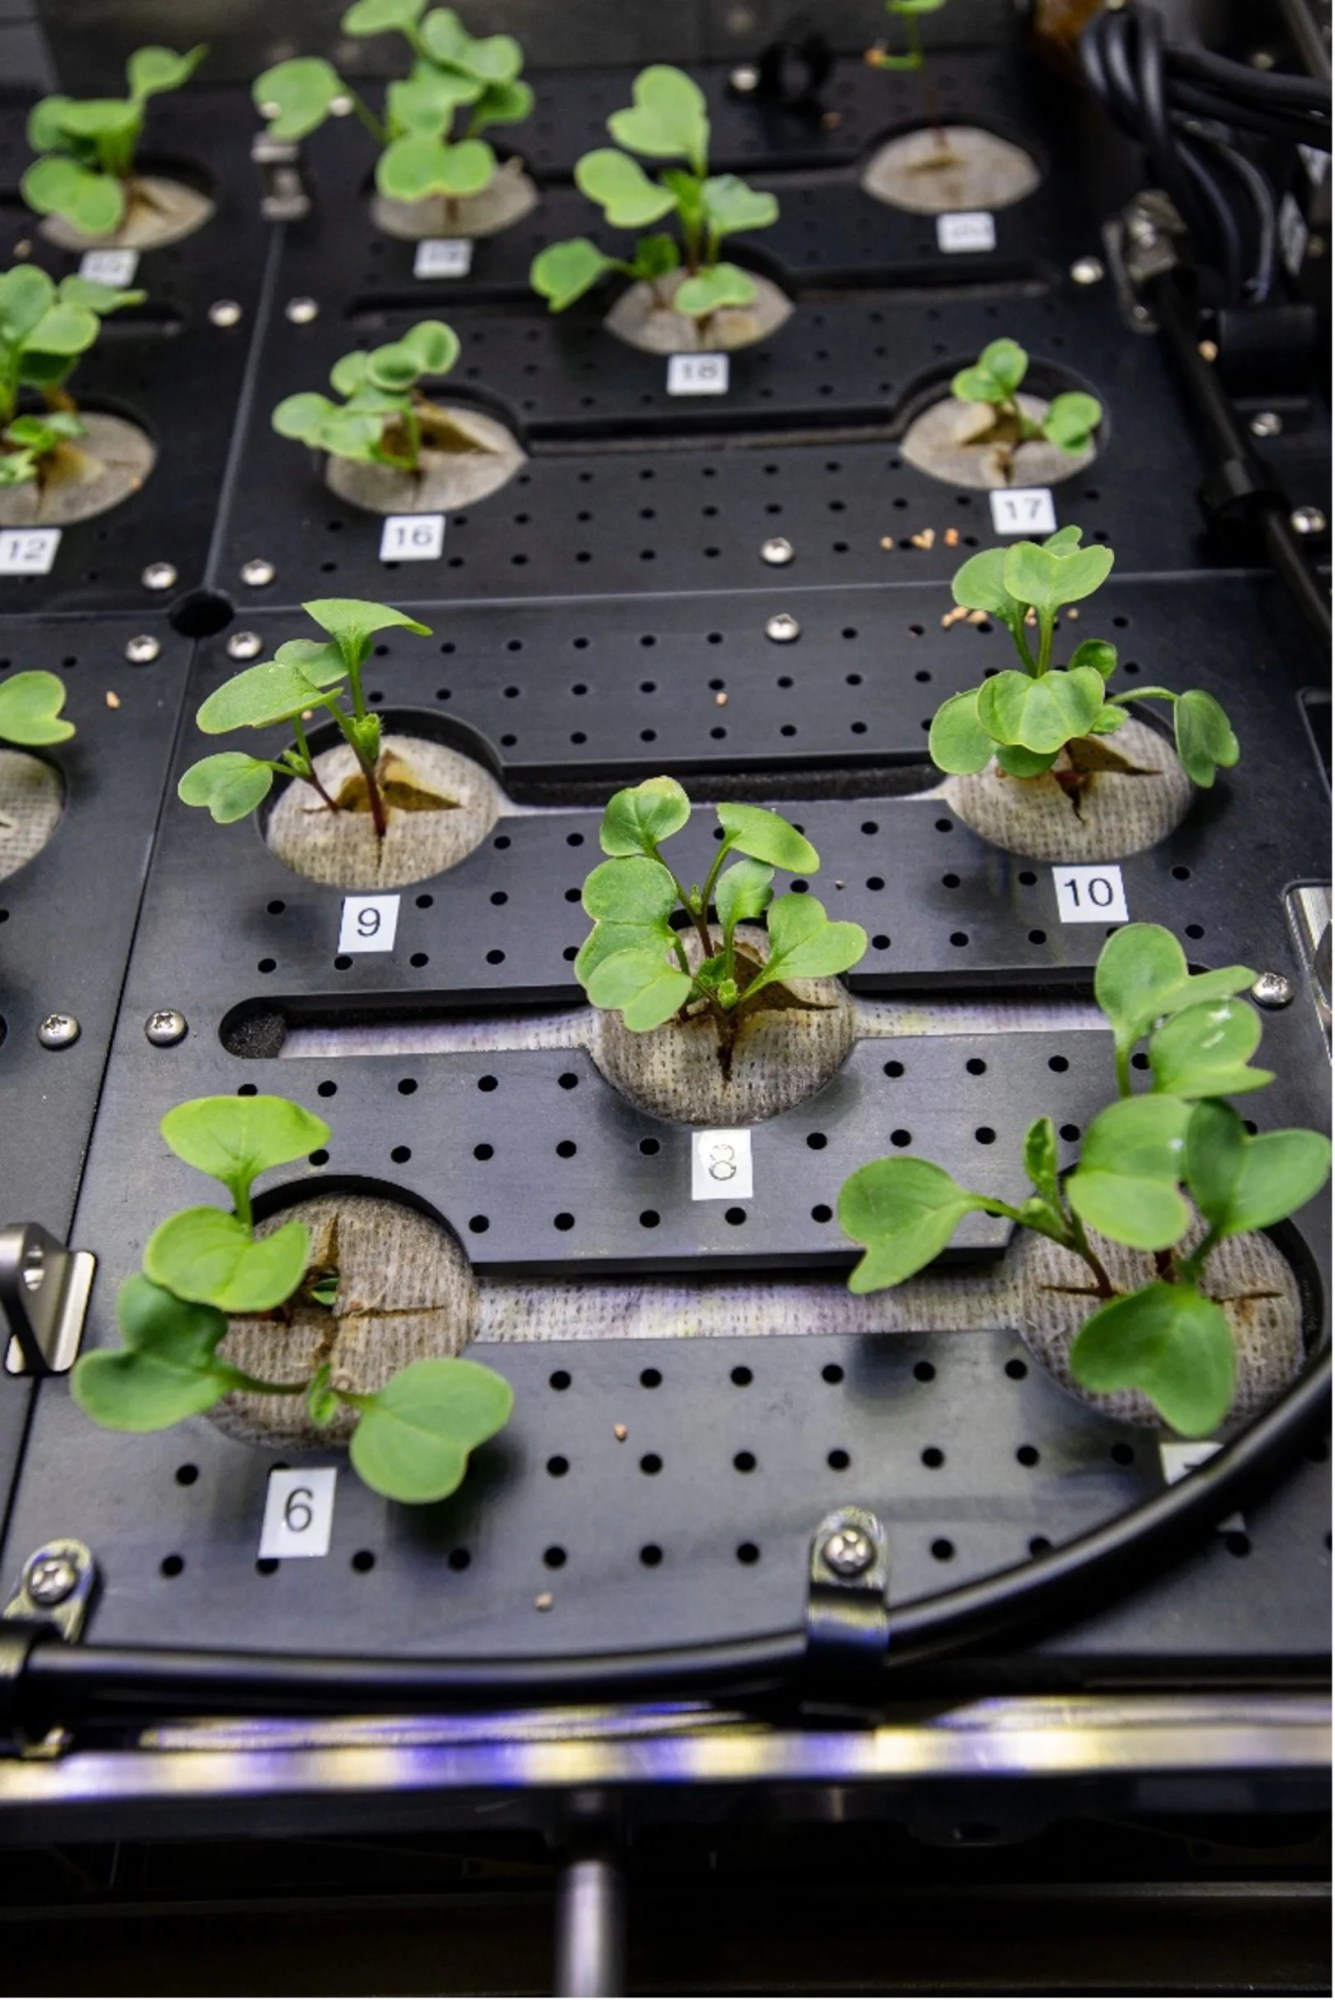 An overhead view of the plant growth chamber. Tiny plants with heart-shaped leaves erupt from skinny strips of soil running horizontally through the thick, black plastic floor.